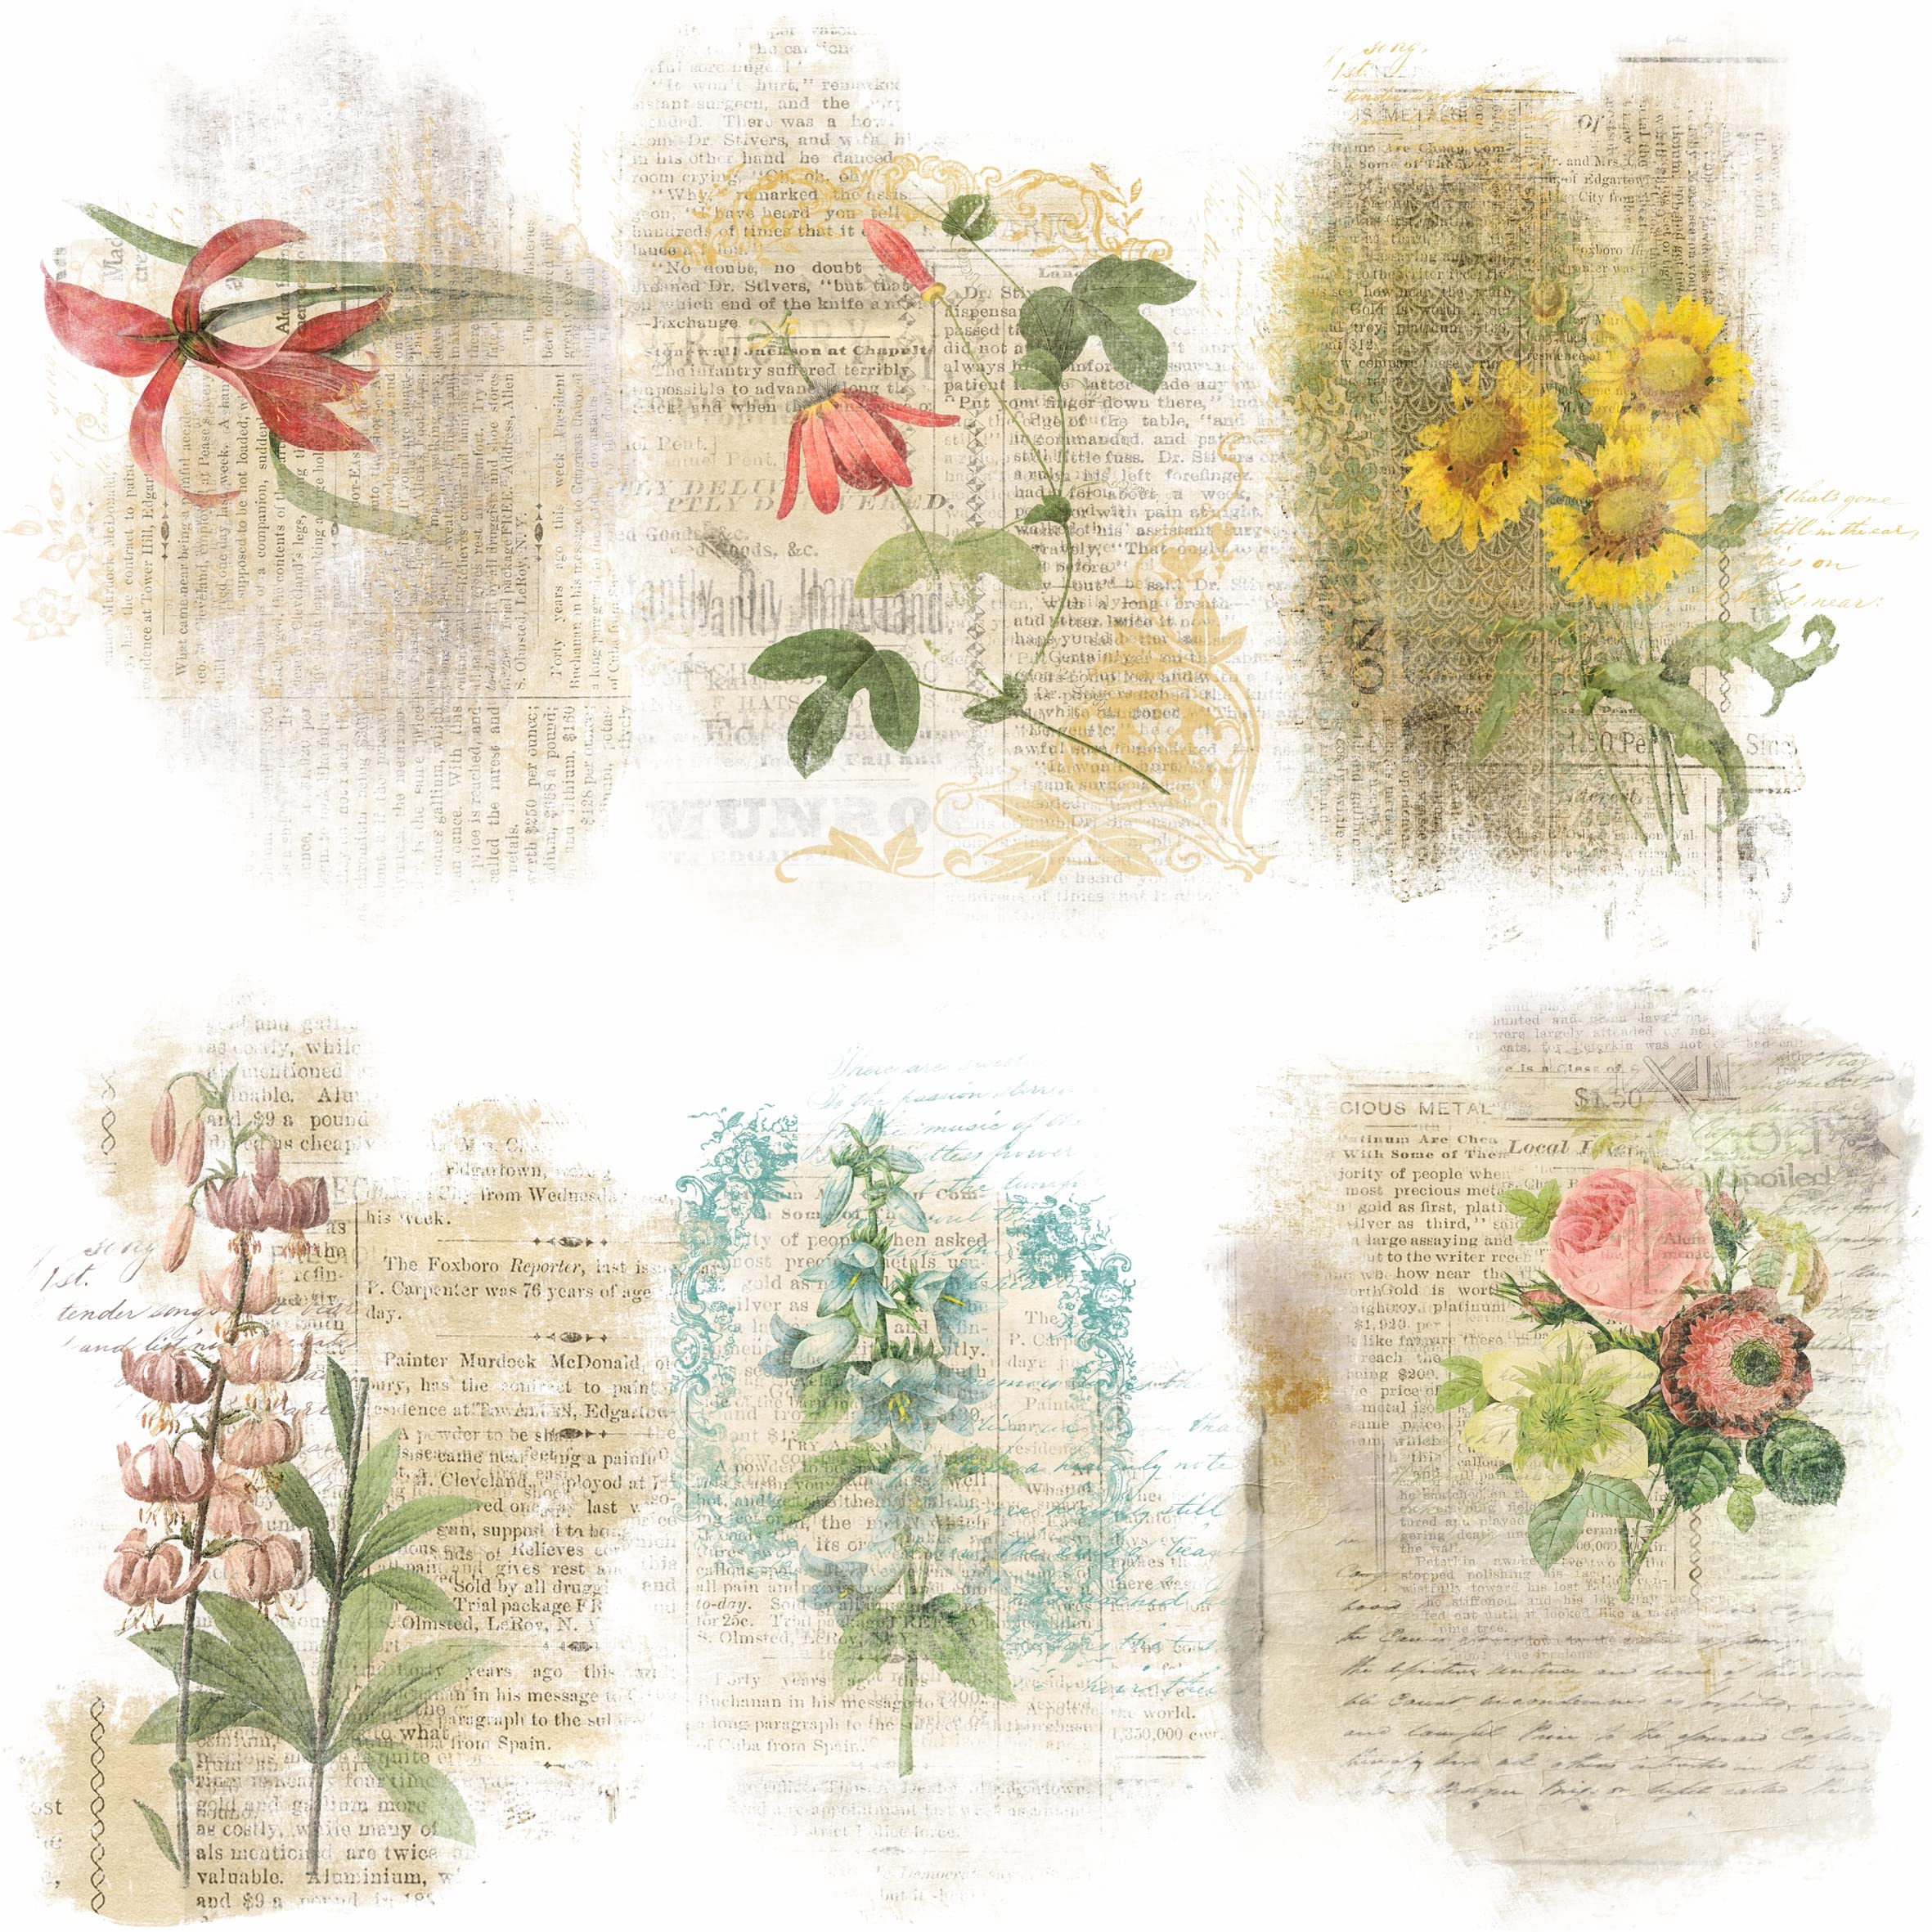 Vintage Flower Theme Mulberry Rice Paper, 8 x 10.5 inch - 6 x Different  Printed Mulberry Paper Images 30gsm Visible Fibres for Decoupage Crafts  Mixed Media Collage Art